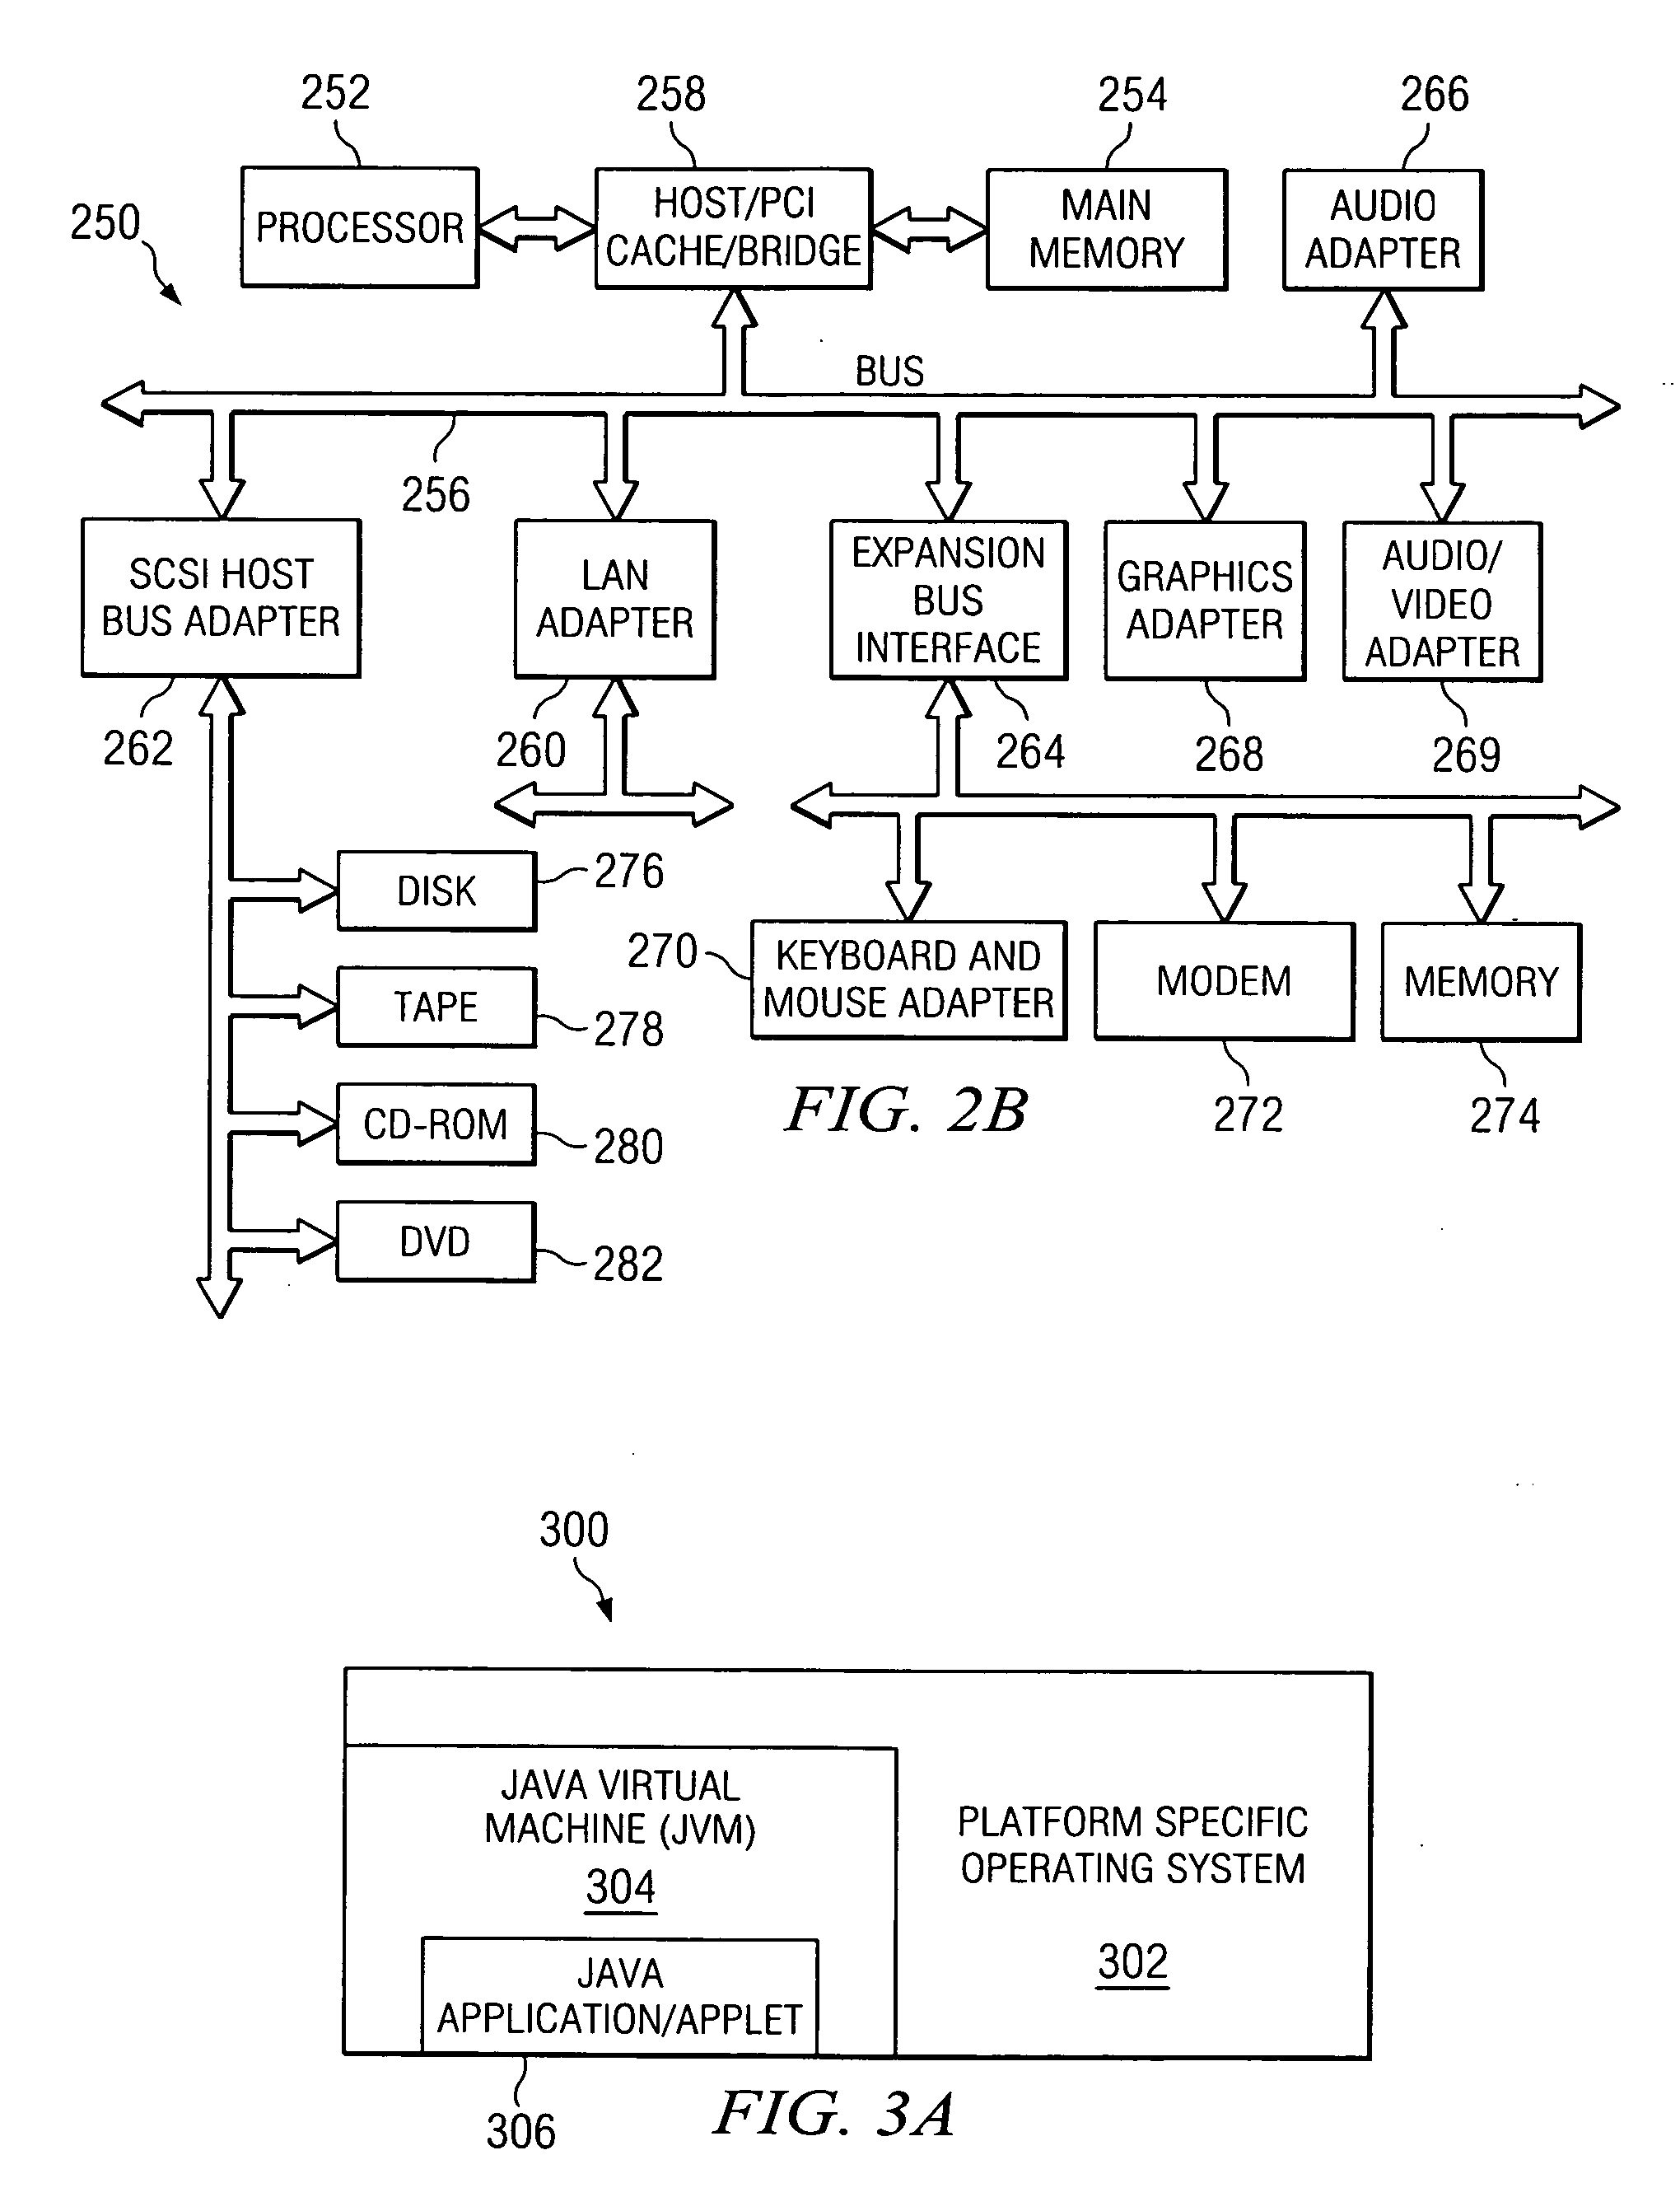 Apparatus and method for dynamic instrumenting of code to minimize system perturbation